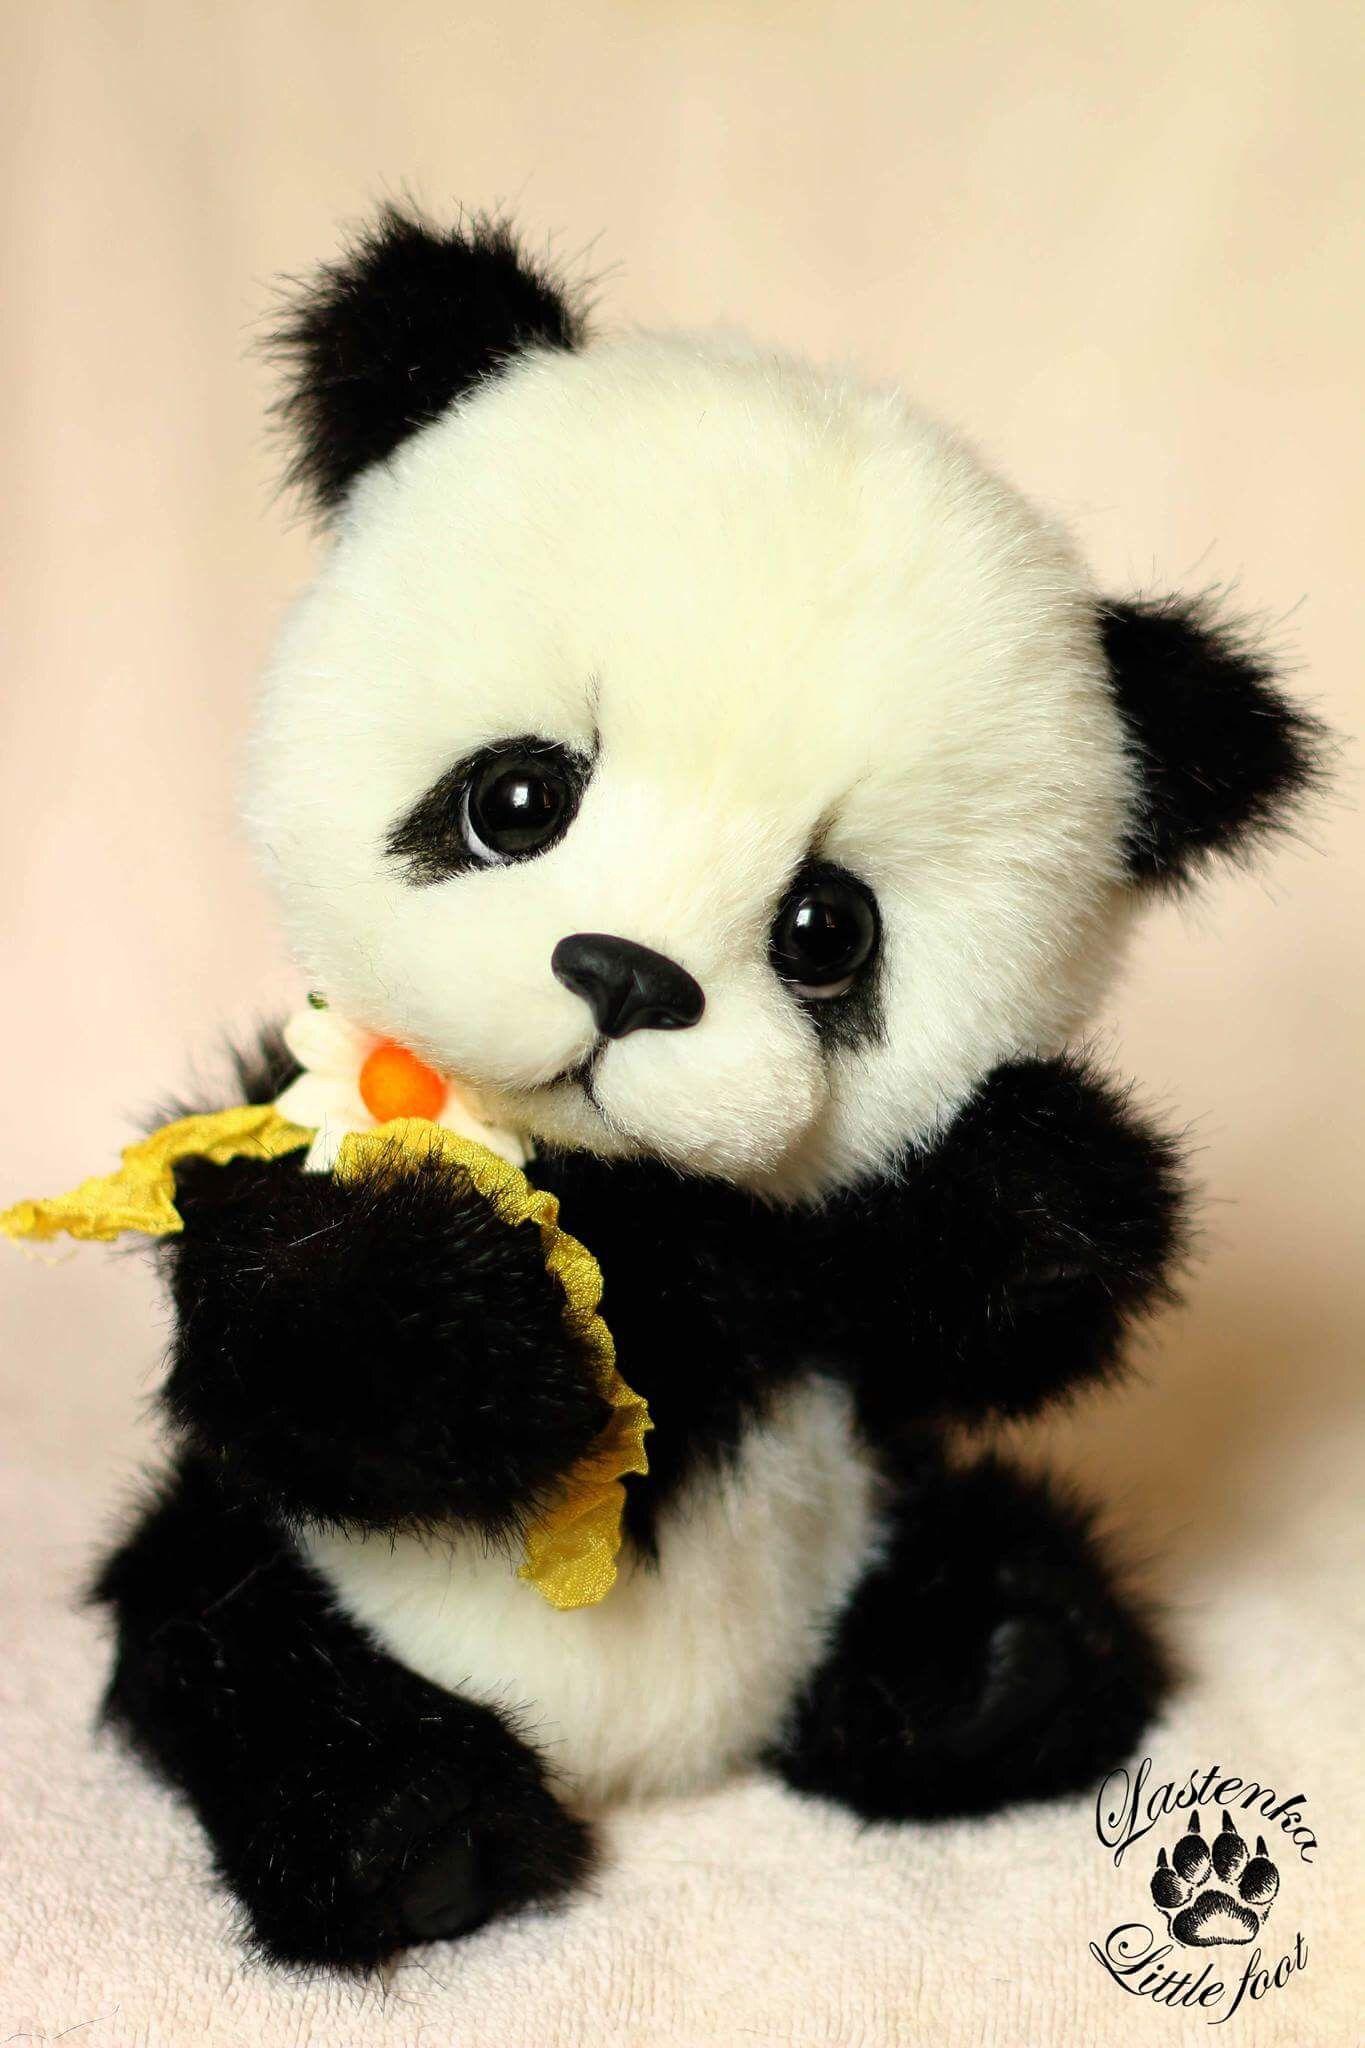 This Panda is so cute you can't stop starring at it's eyes